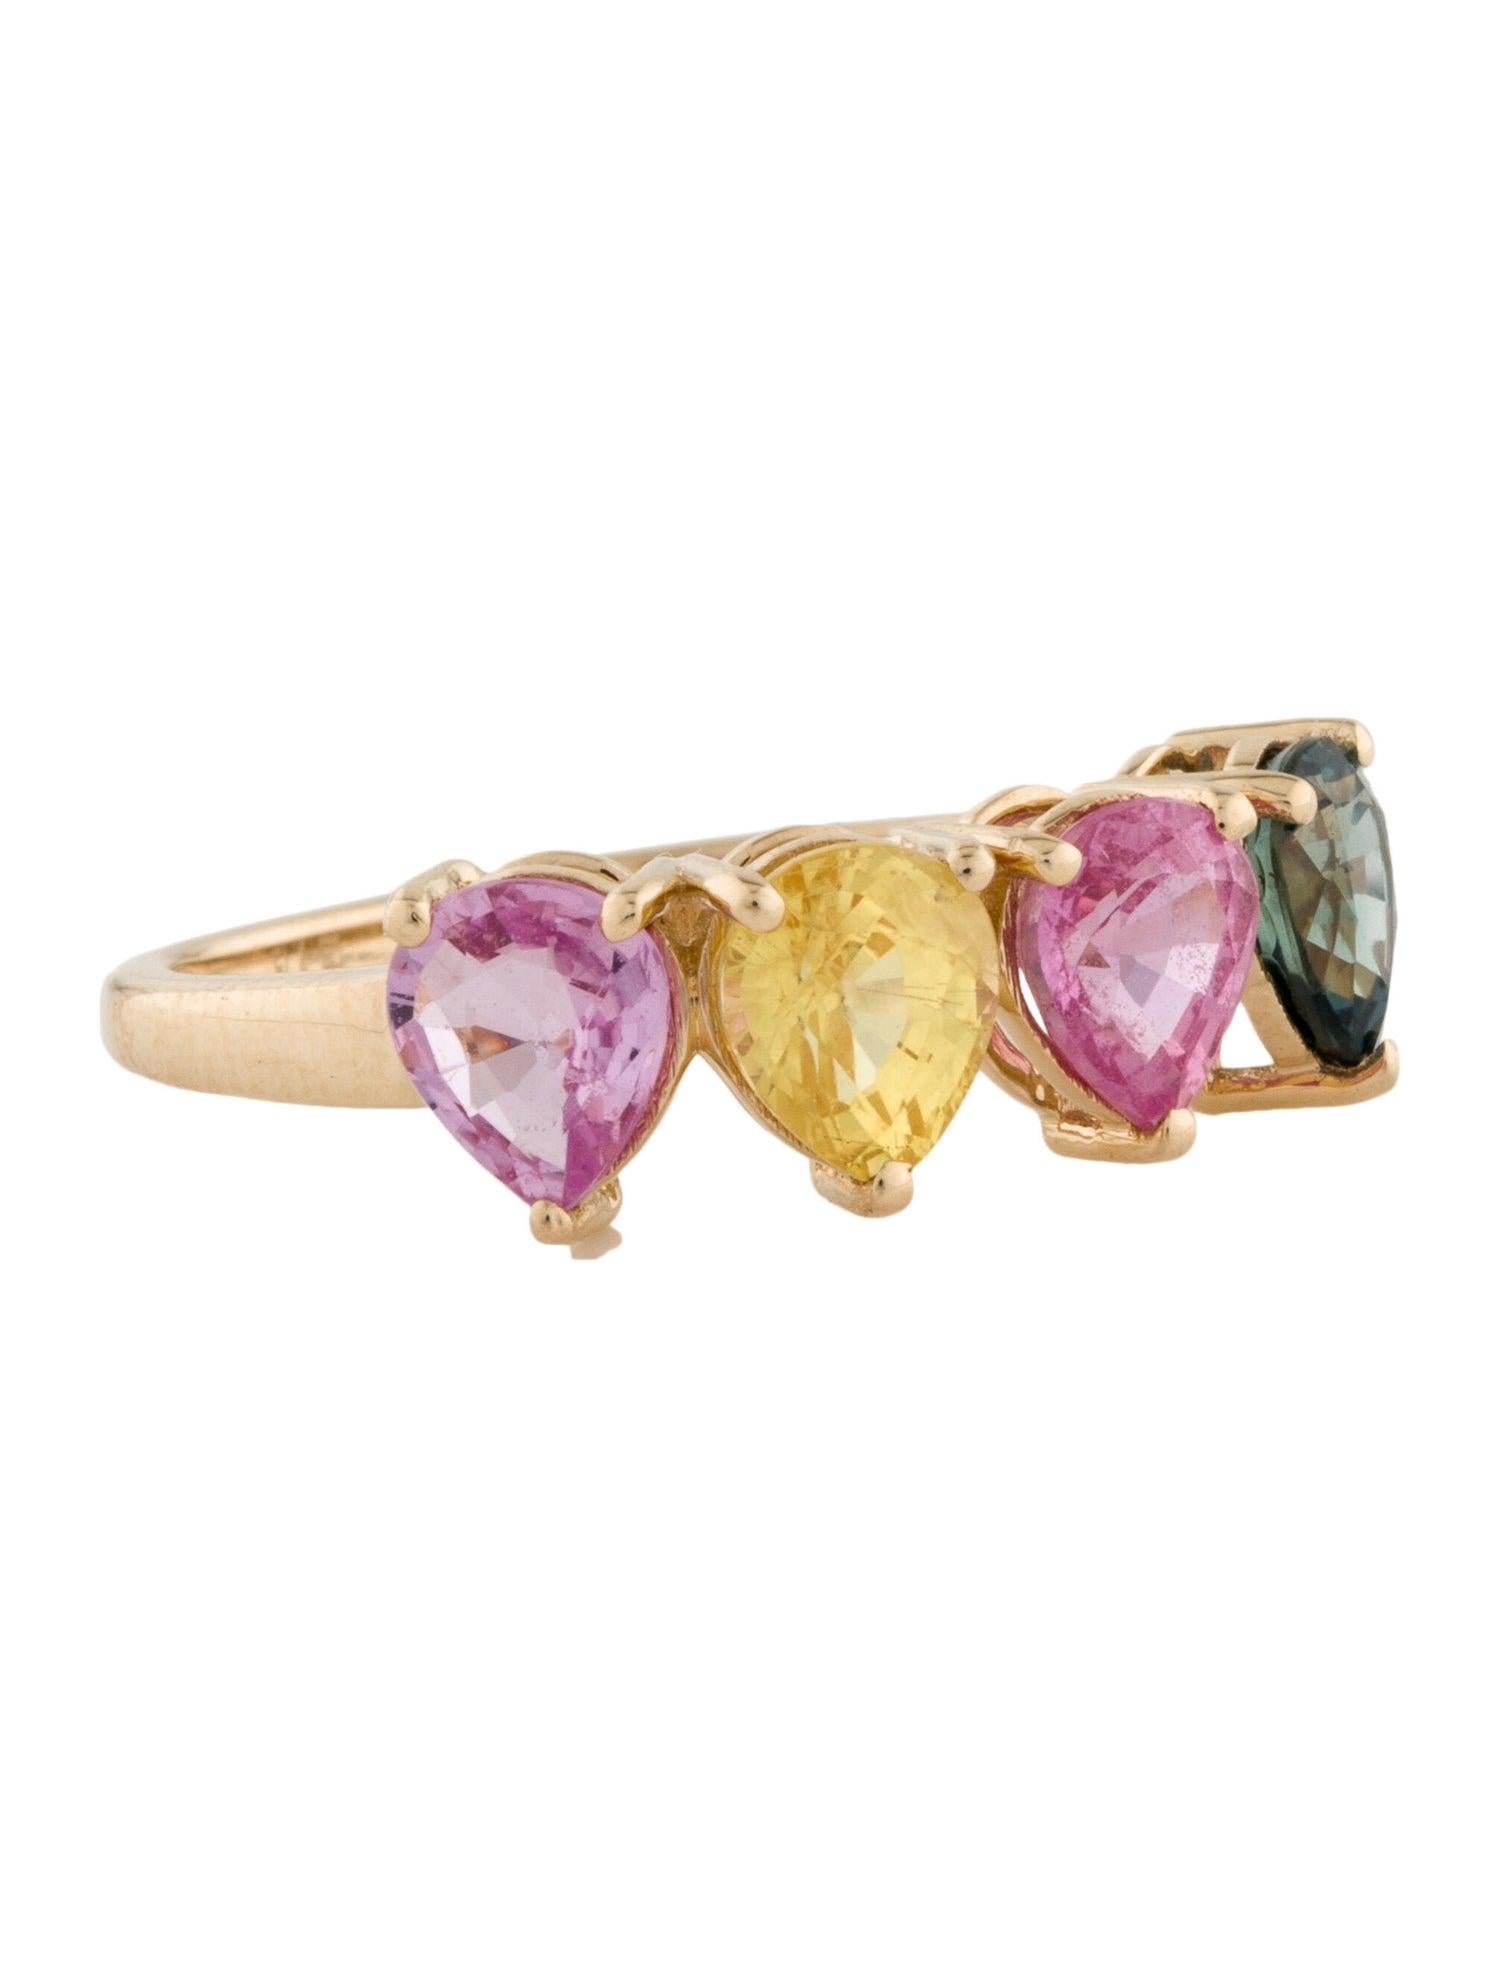 Dive into a world of vibrant hues and radiant elegance with our Rainbow Symphony Multi Sapphire Ring. This exquisite piece from the Jeweltique collection is a celebration of nature's finest gemstones, capturing the kaleidoscope of colors that grace